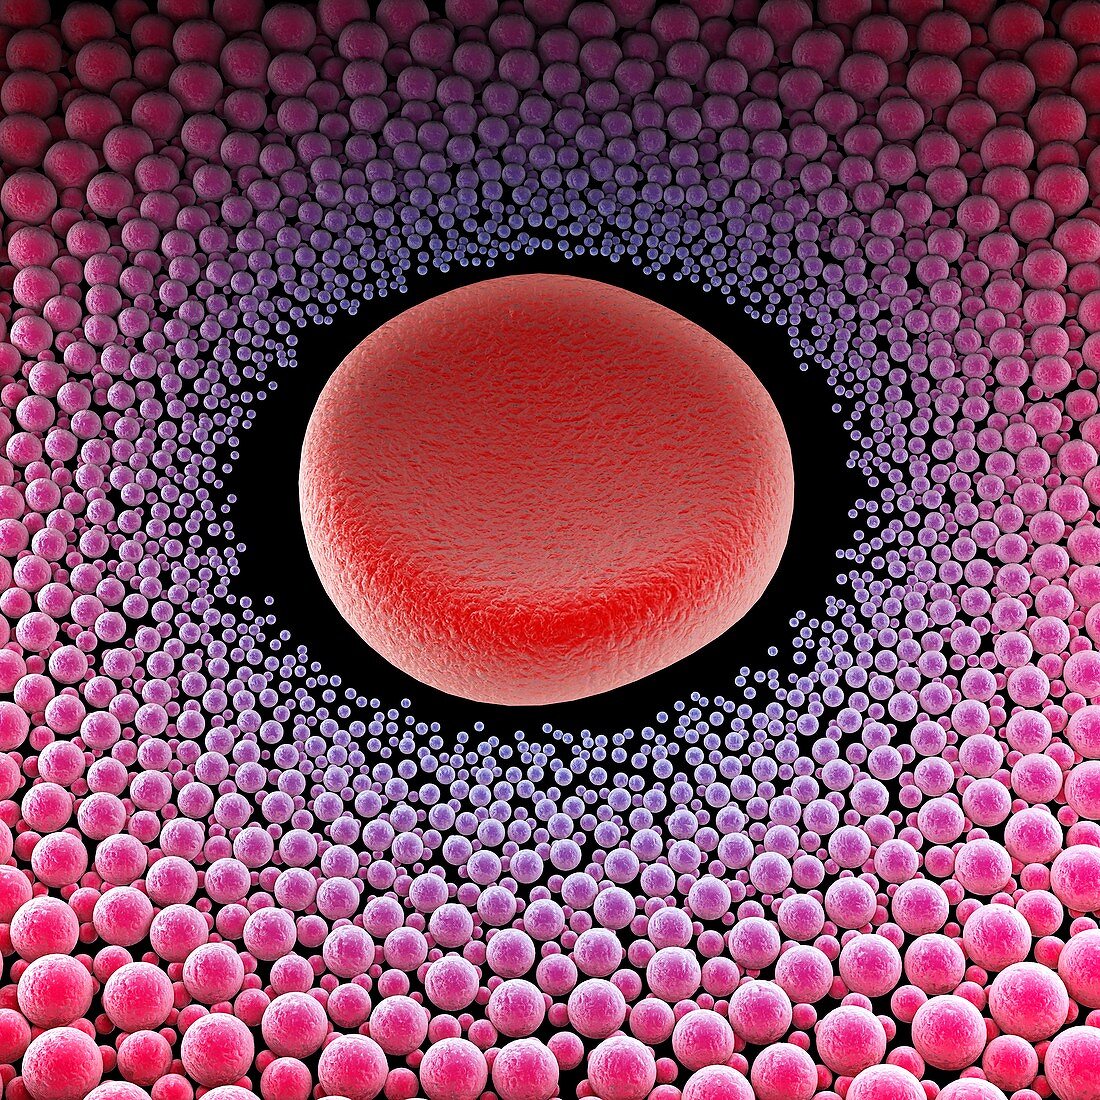 Nanoparticles and blood cell, illustration